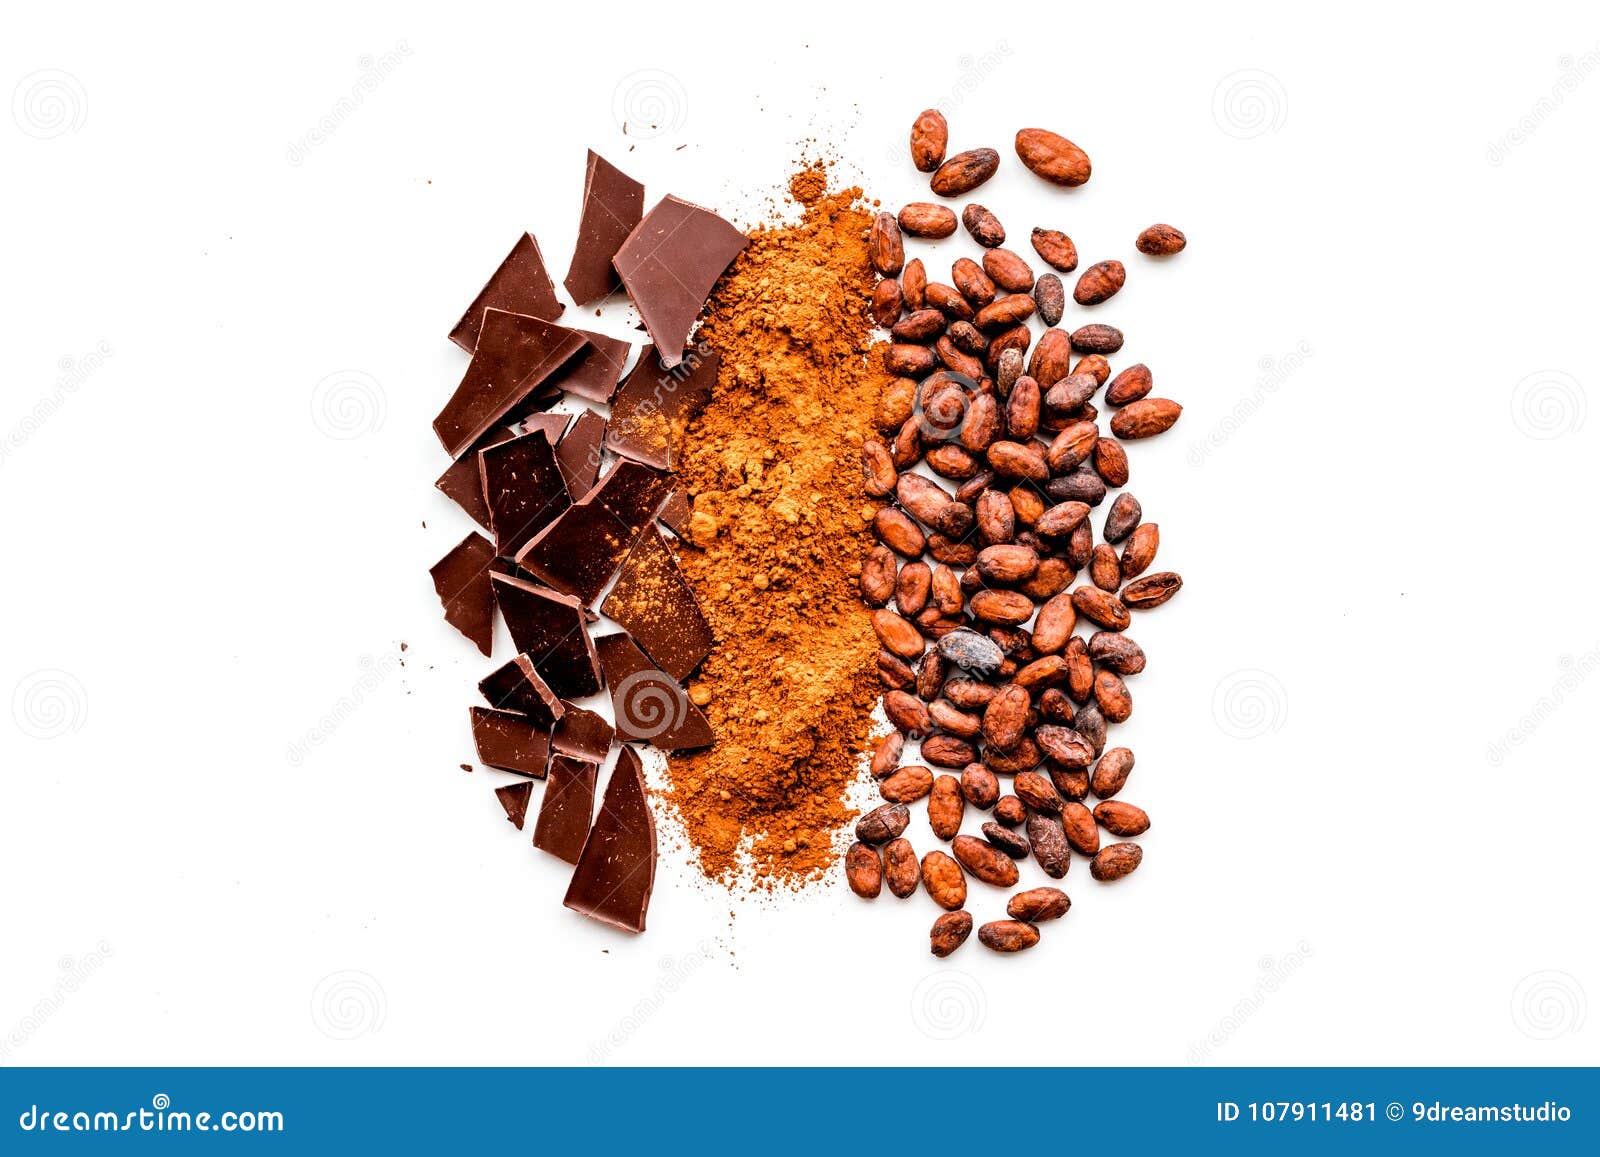 make chocolate. cocoa powder near cocoa beans and pieces of chocolate on white background top view copy space